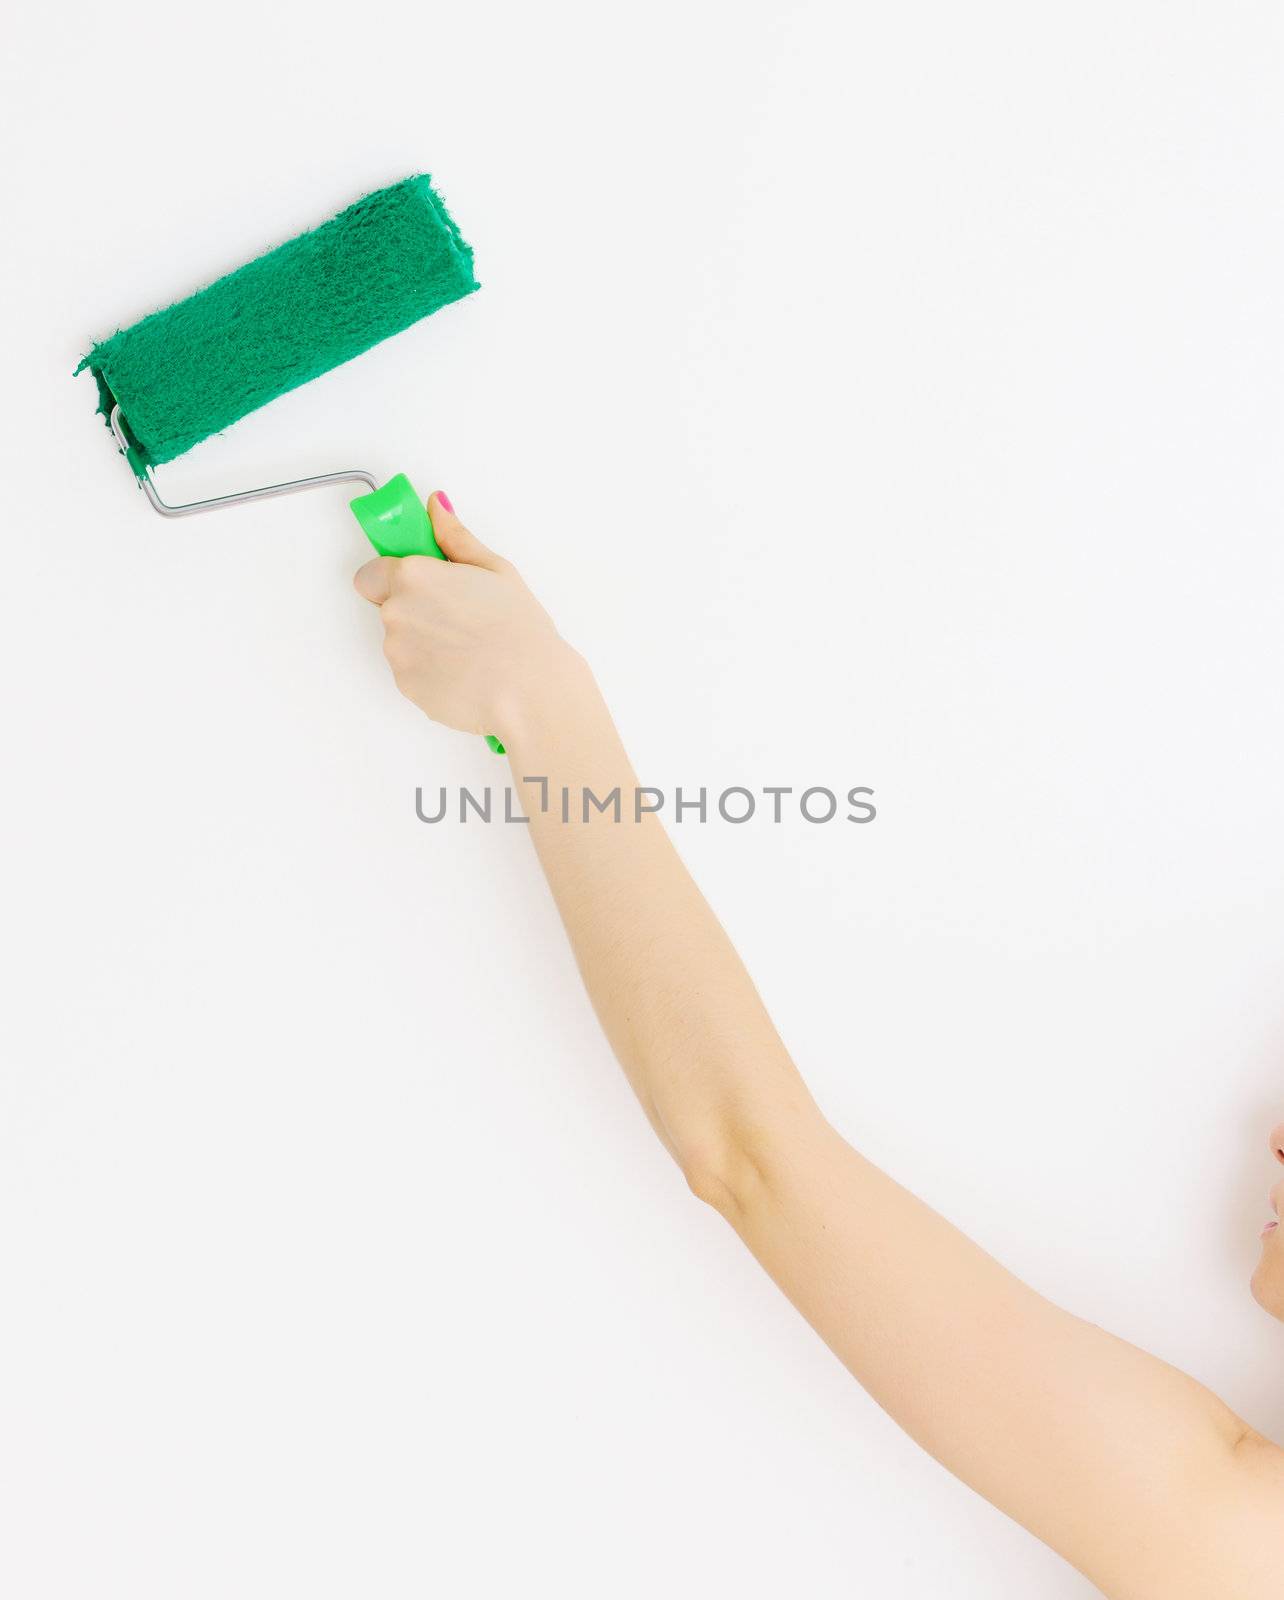 Painting interior wall of home with paint roller